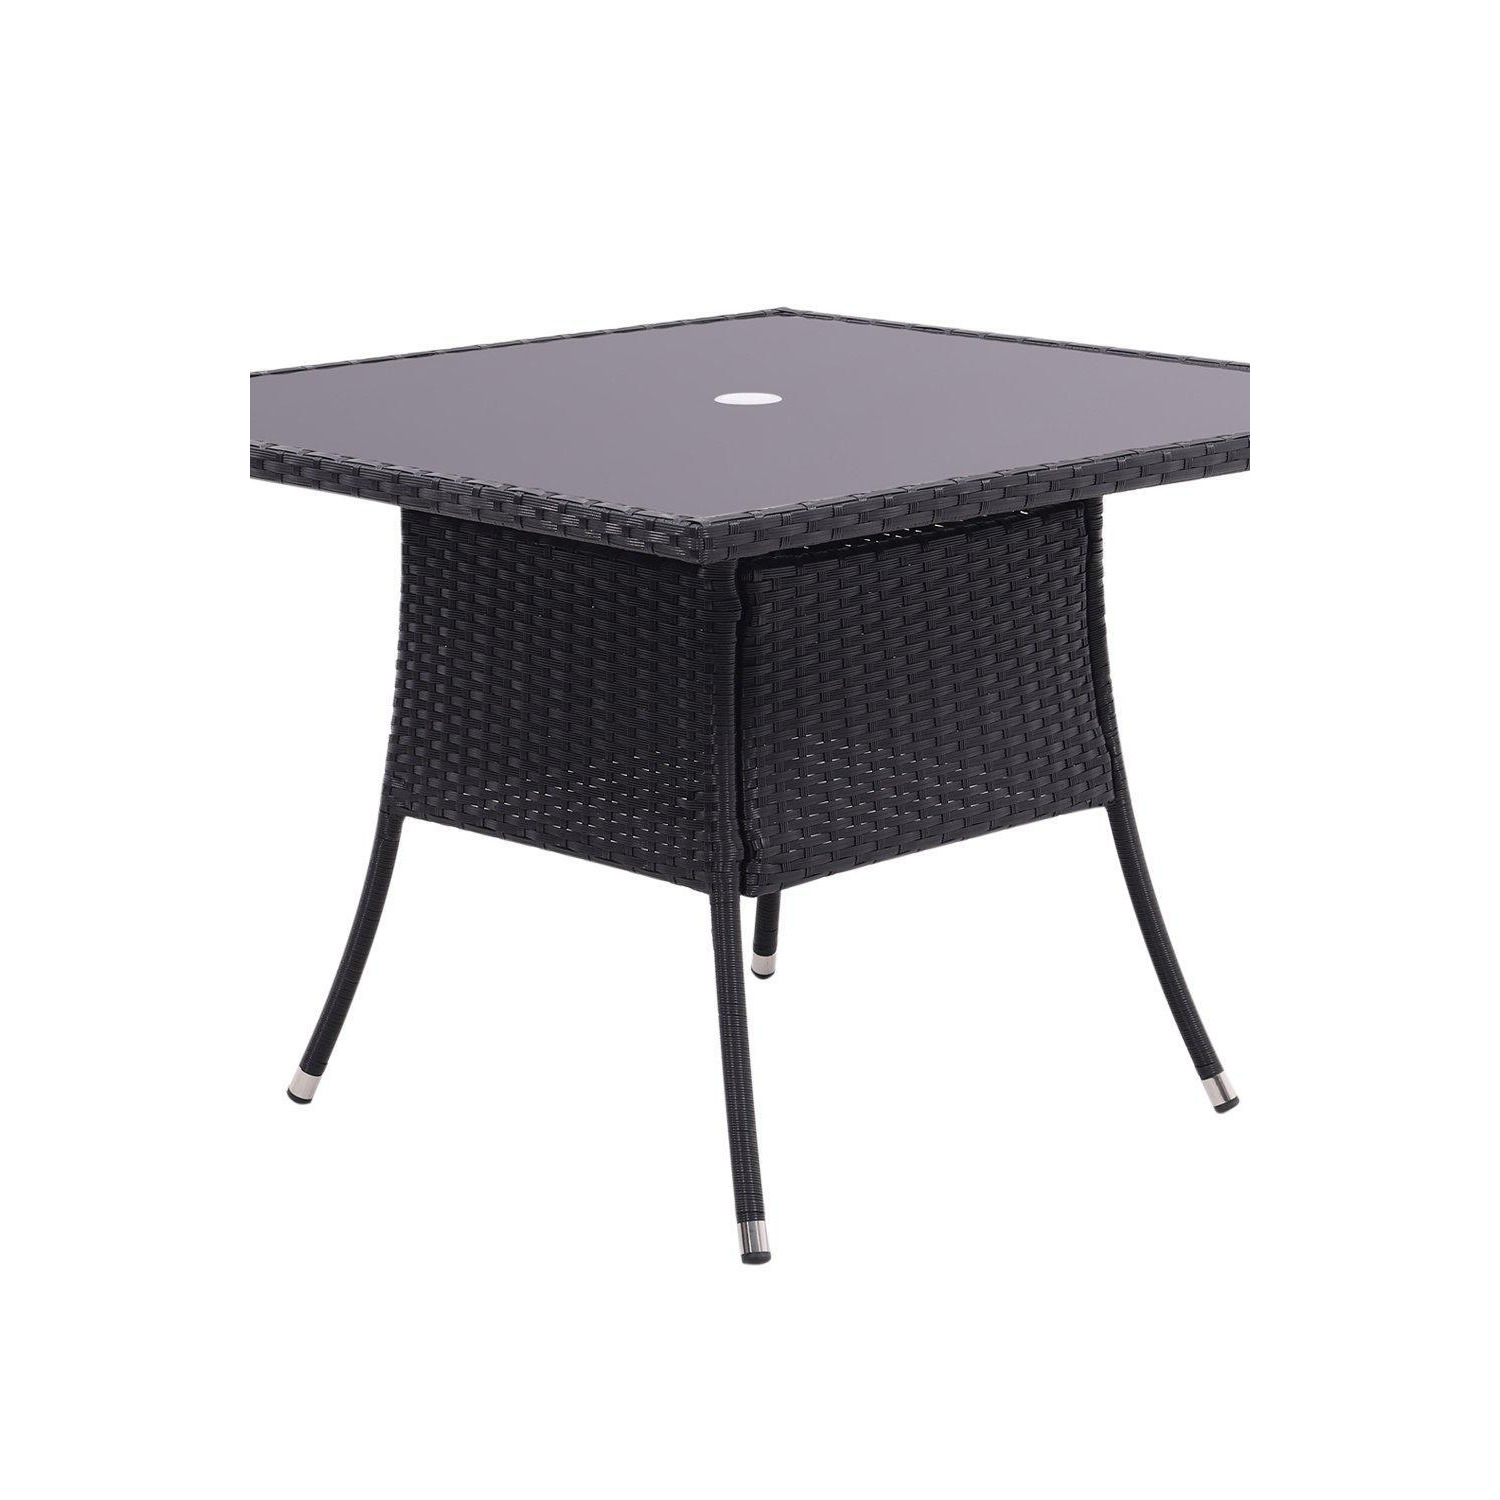 Square Wicker Garden Dining Table With Parasol Hole - image 1